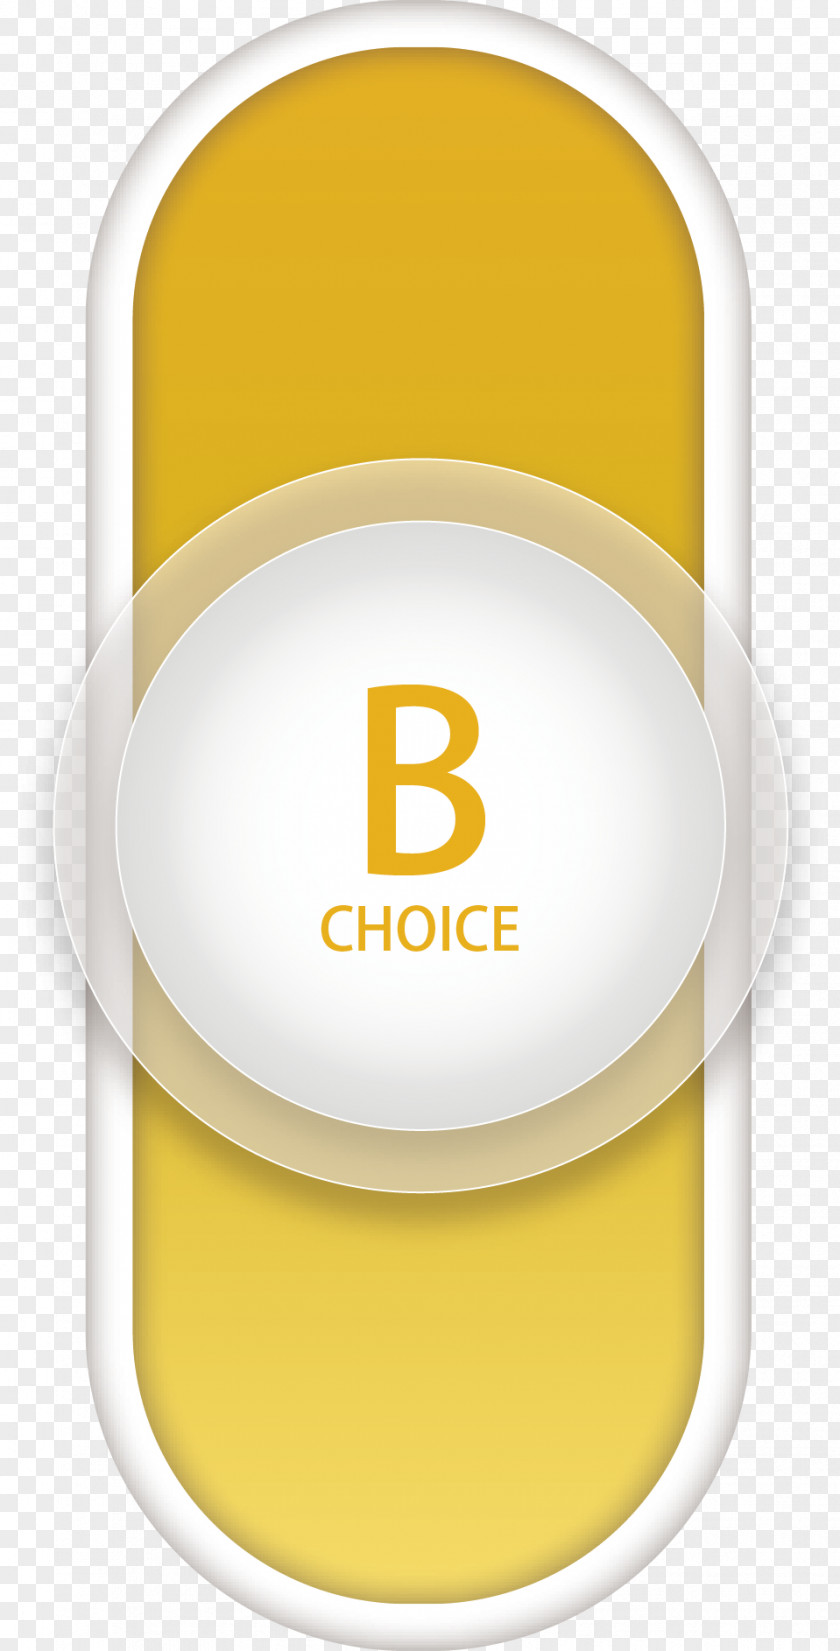 The Yellow Button Slides Sliding Element PNG